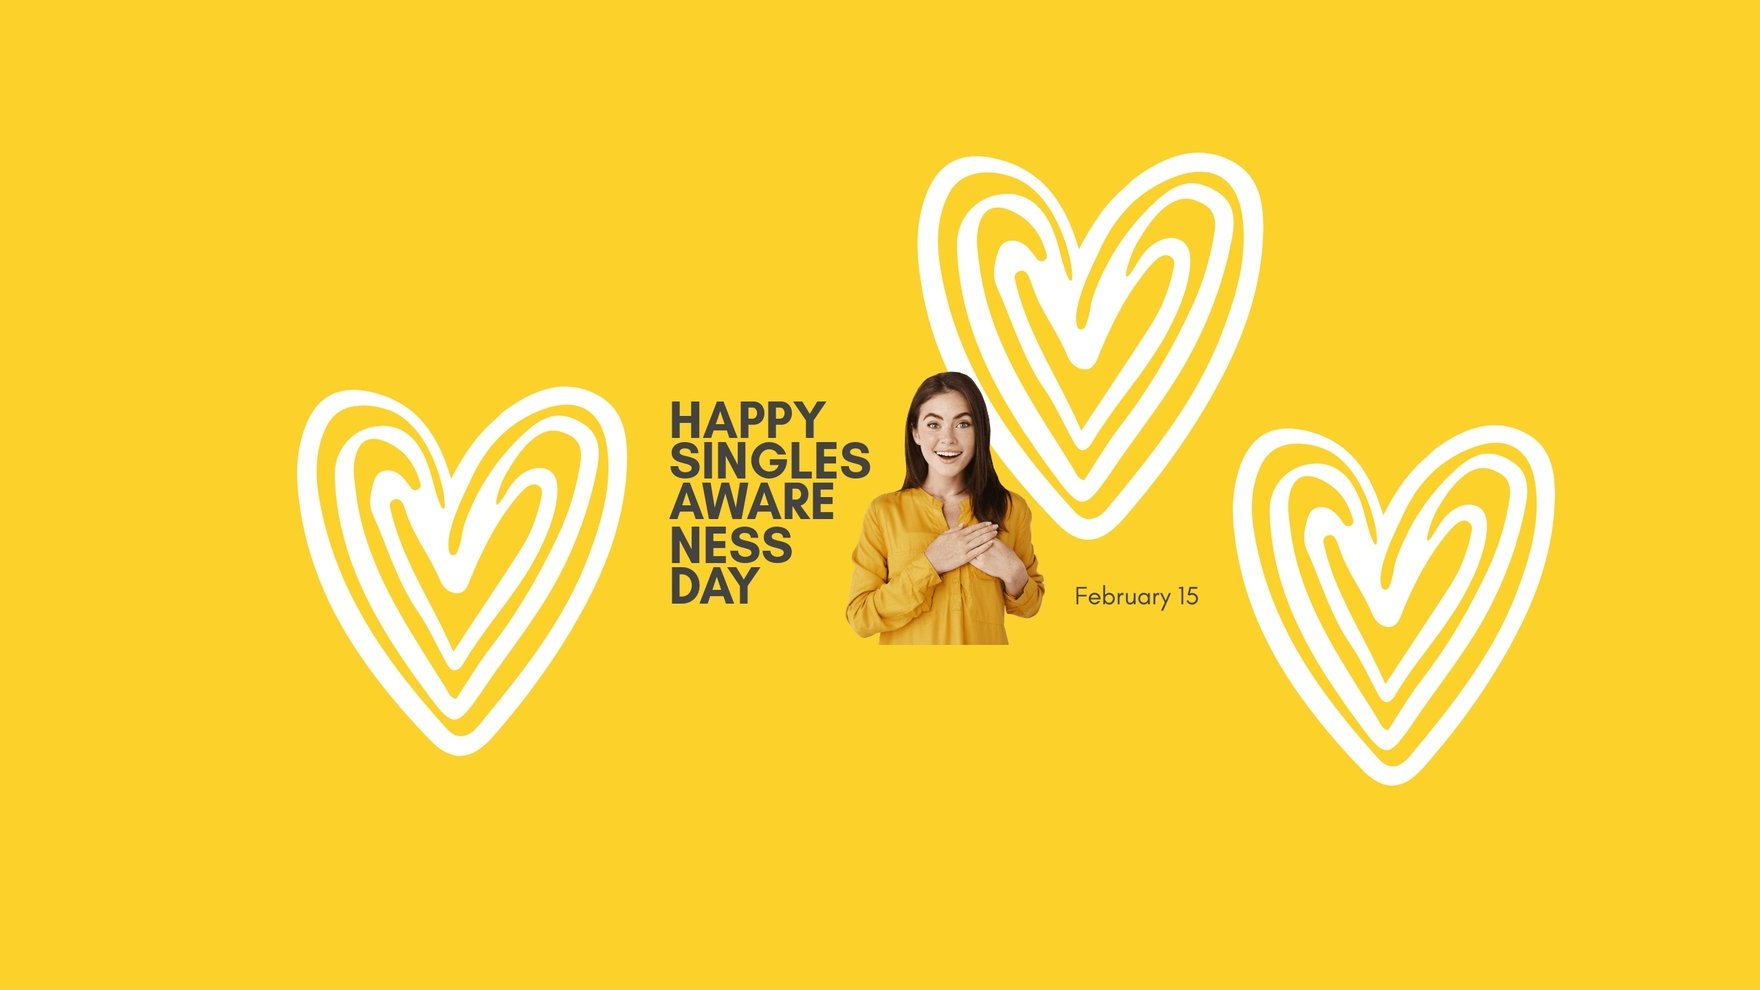 Happy Singles Awareness Day Youtube Banner Template